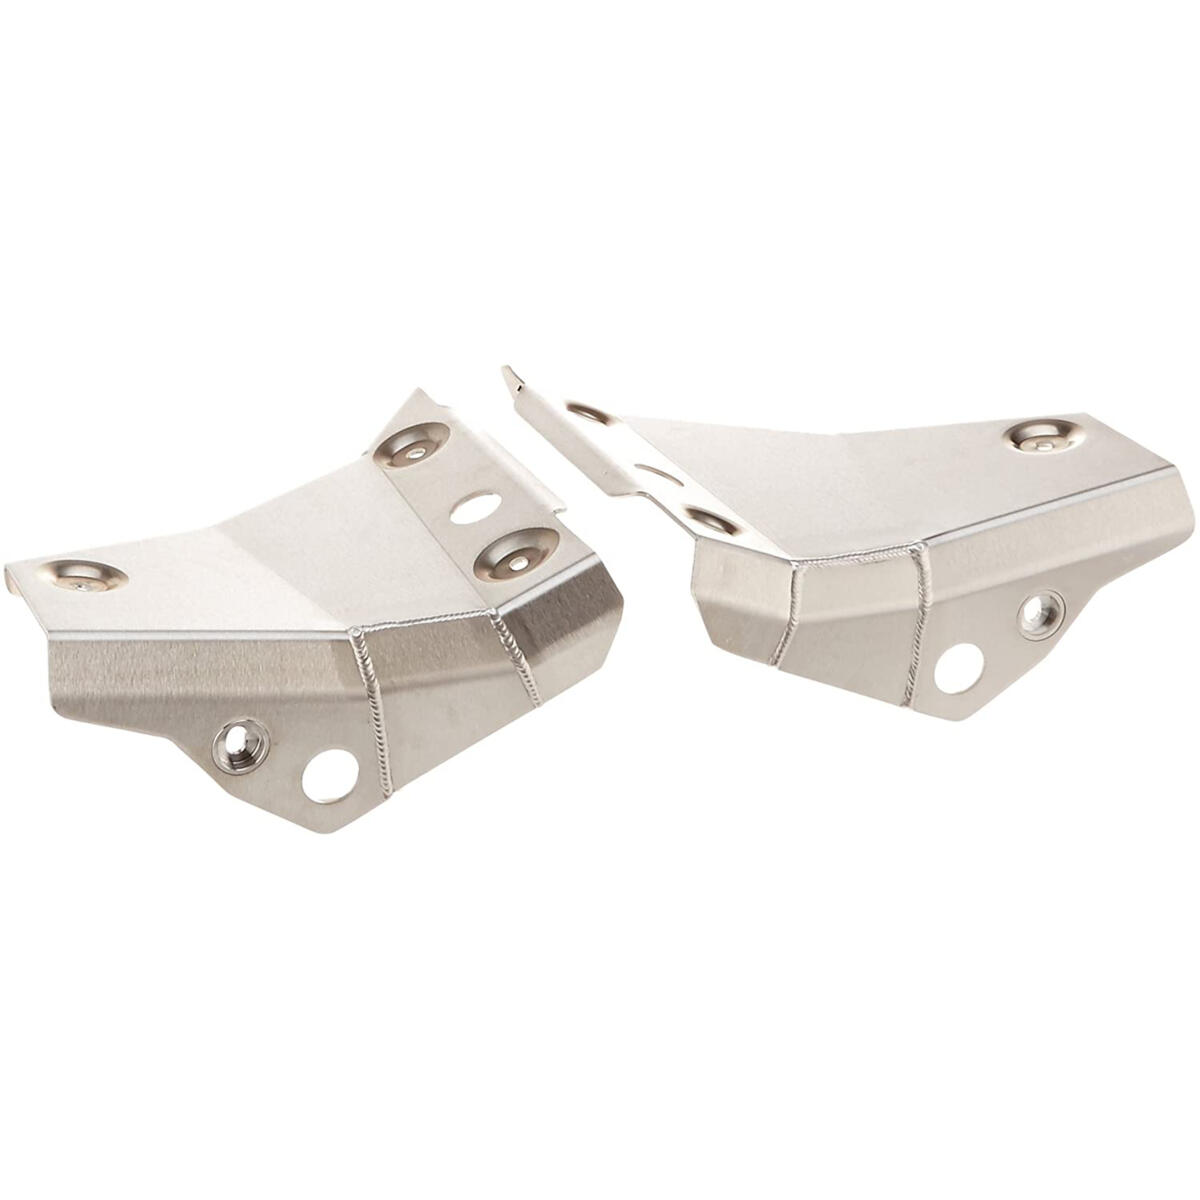 These Front A-Arm Skid Plates provide lightweight, durable protection to lower A-arms from rocks and trees.